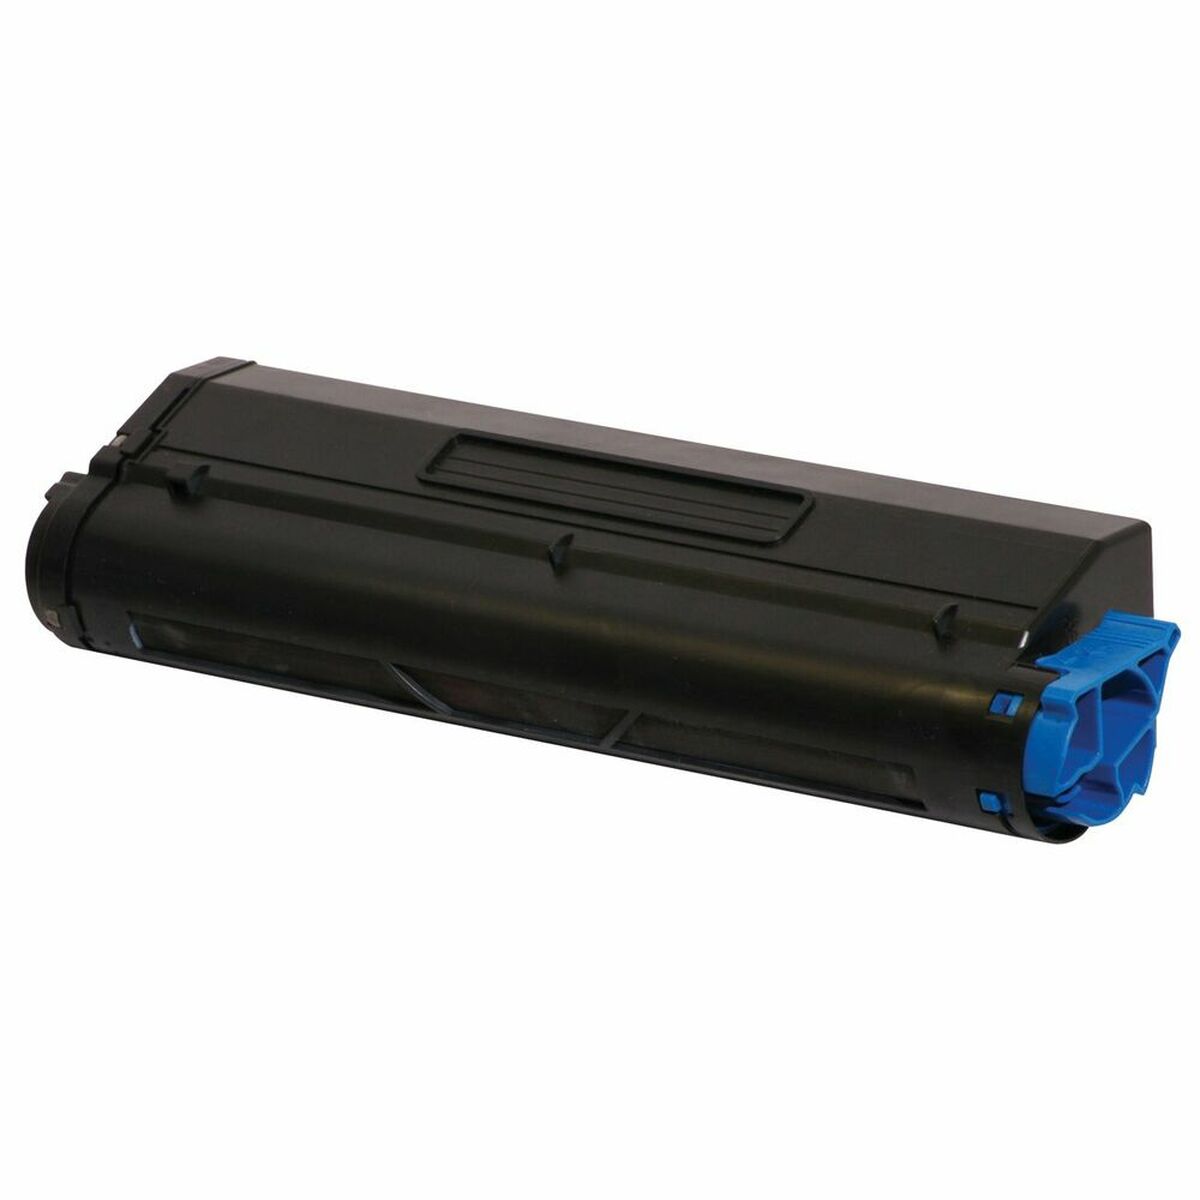 Toner Brother 43502002 Black Magenta, Brother, Computing, Printers and accessories, toner-brother-43502002-black-magenta, Brand_Brother, category-reference-2609, category-reference-2642, category-reference-2876, category-reference-t-19685, category-reference-t-19911, category-reference-t-21377, category-reference-t-25688, Condition_NEW, office, Price_100 - 200, Teleworking, RiotNook